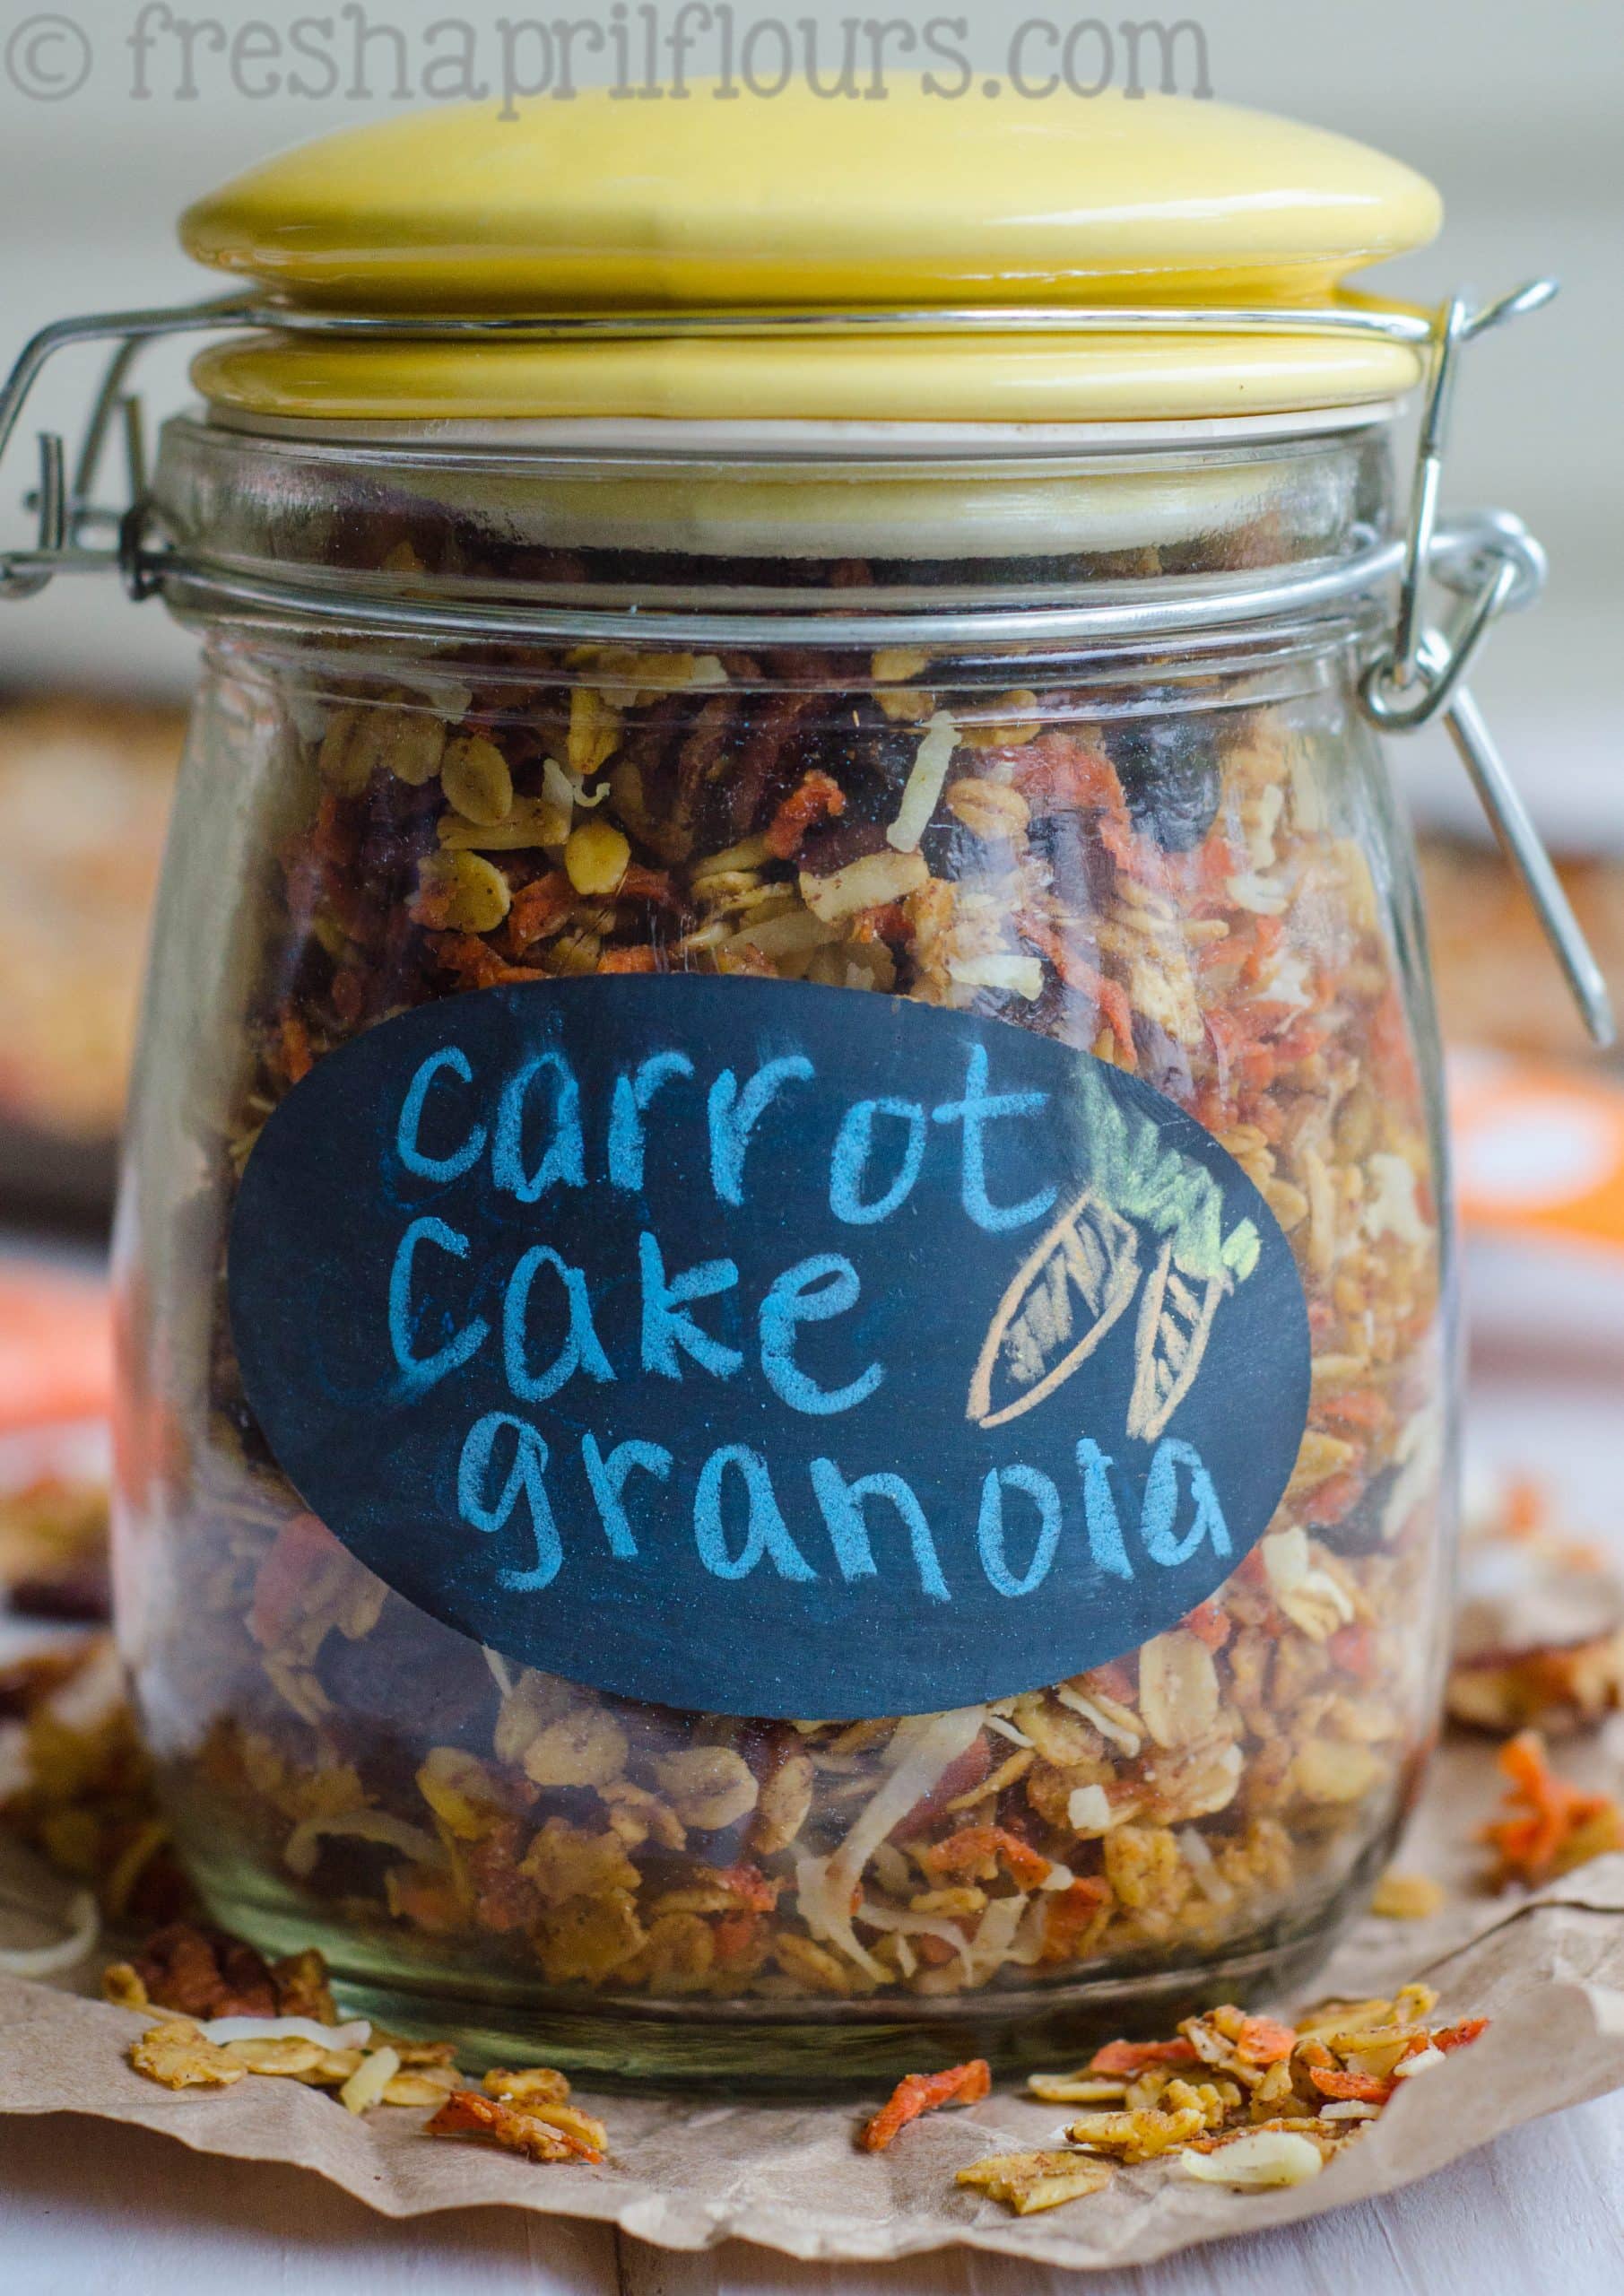 This soft and chewy carrot cake granola is perfectly spicy and full of the best parts of carrot cake. via @frshaprilflours